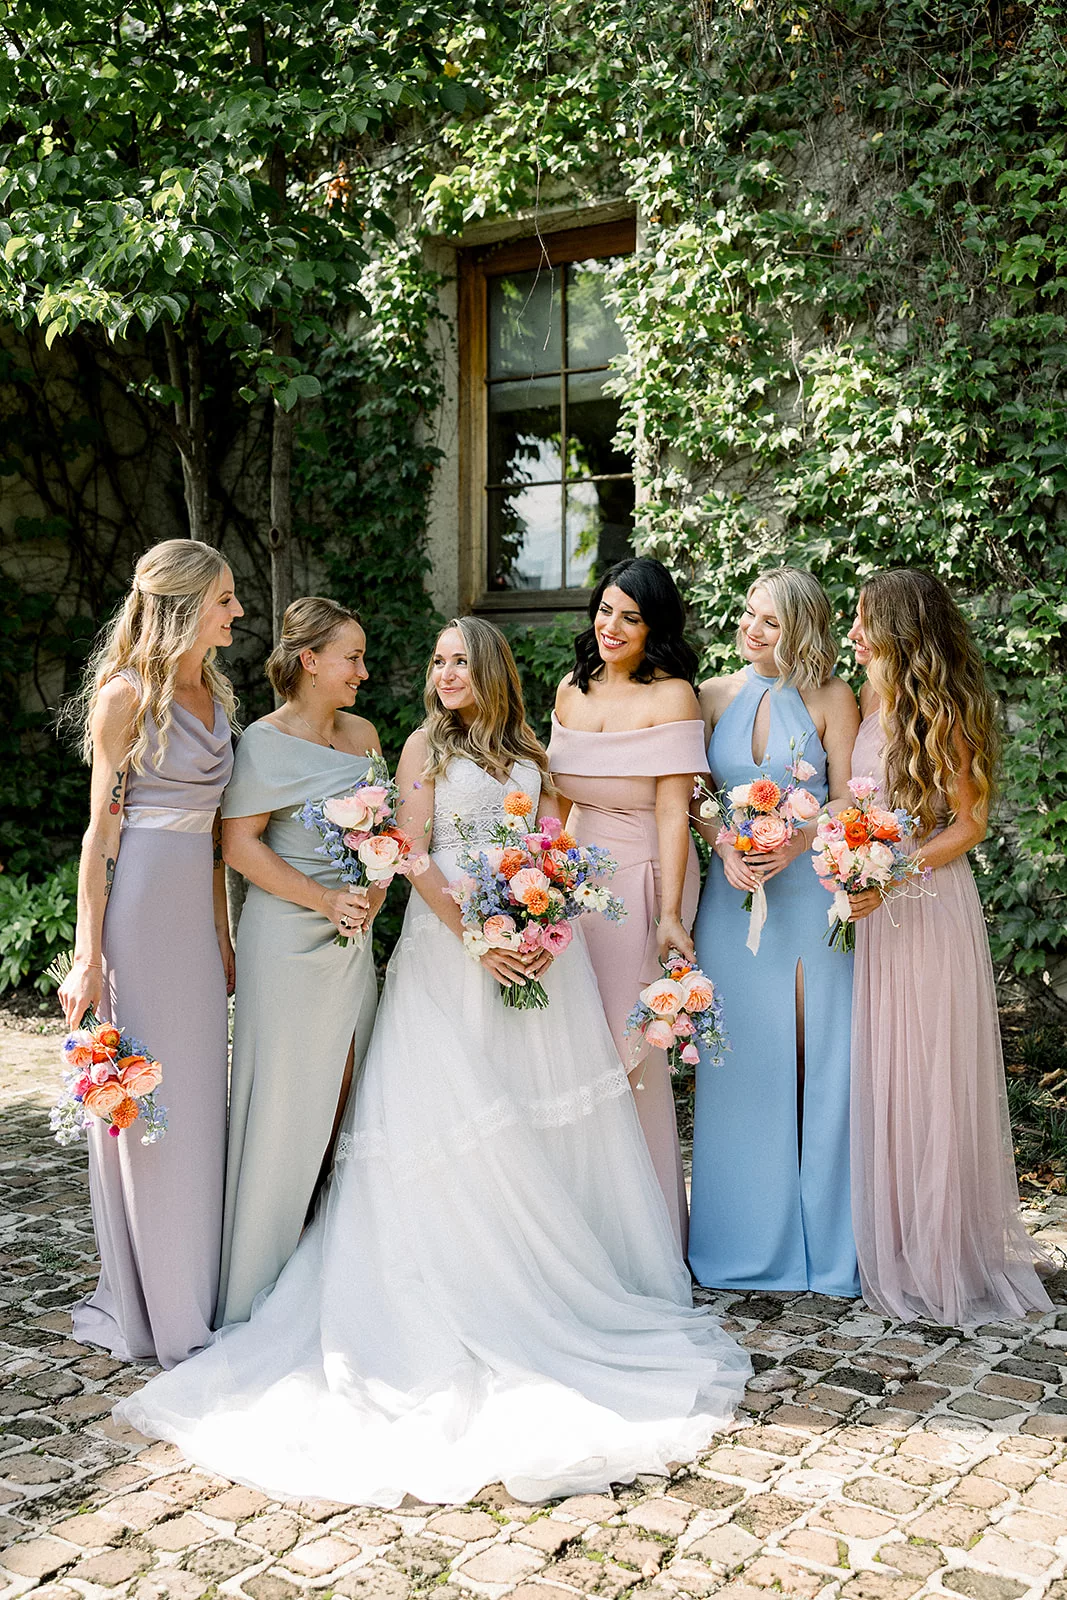 A bride smiles to her bridesmaids as they stand on a patio of an ivy covered building